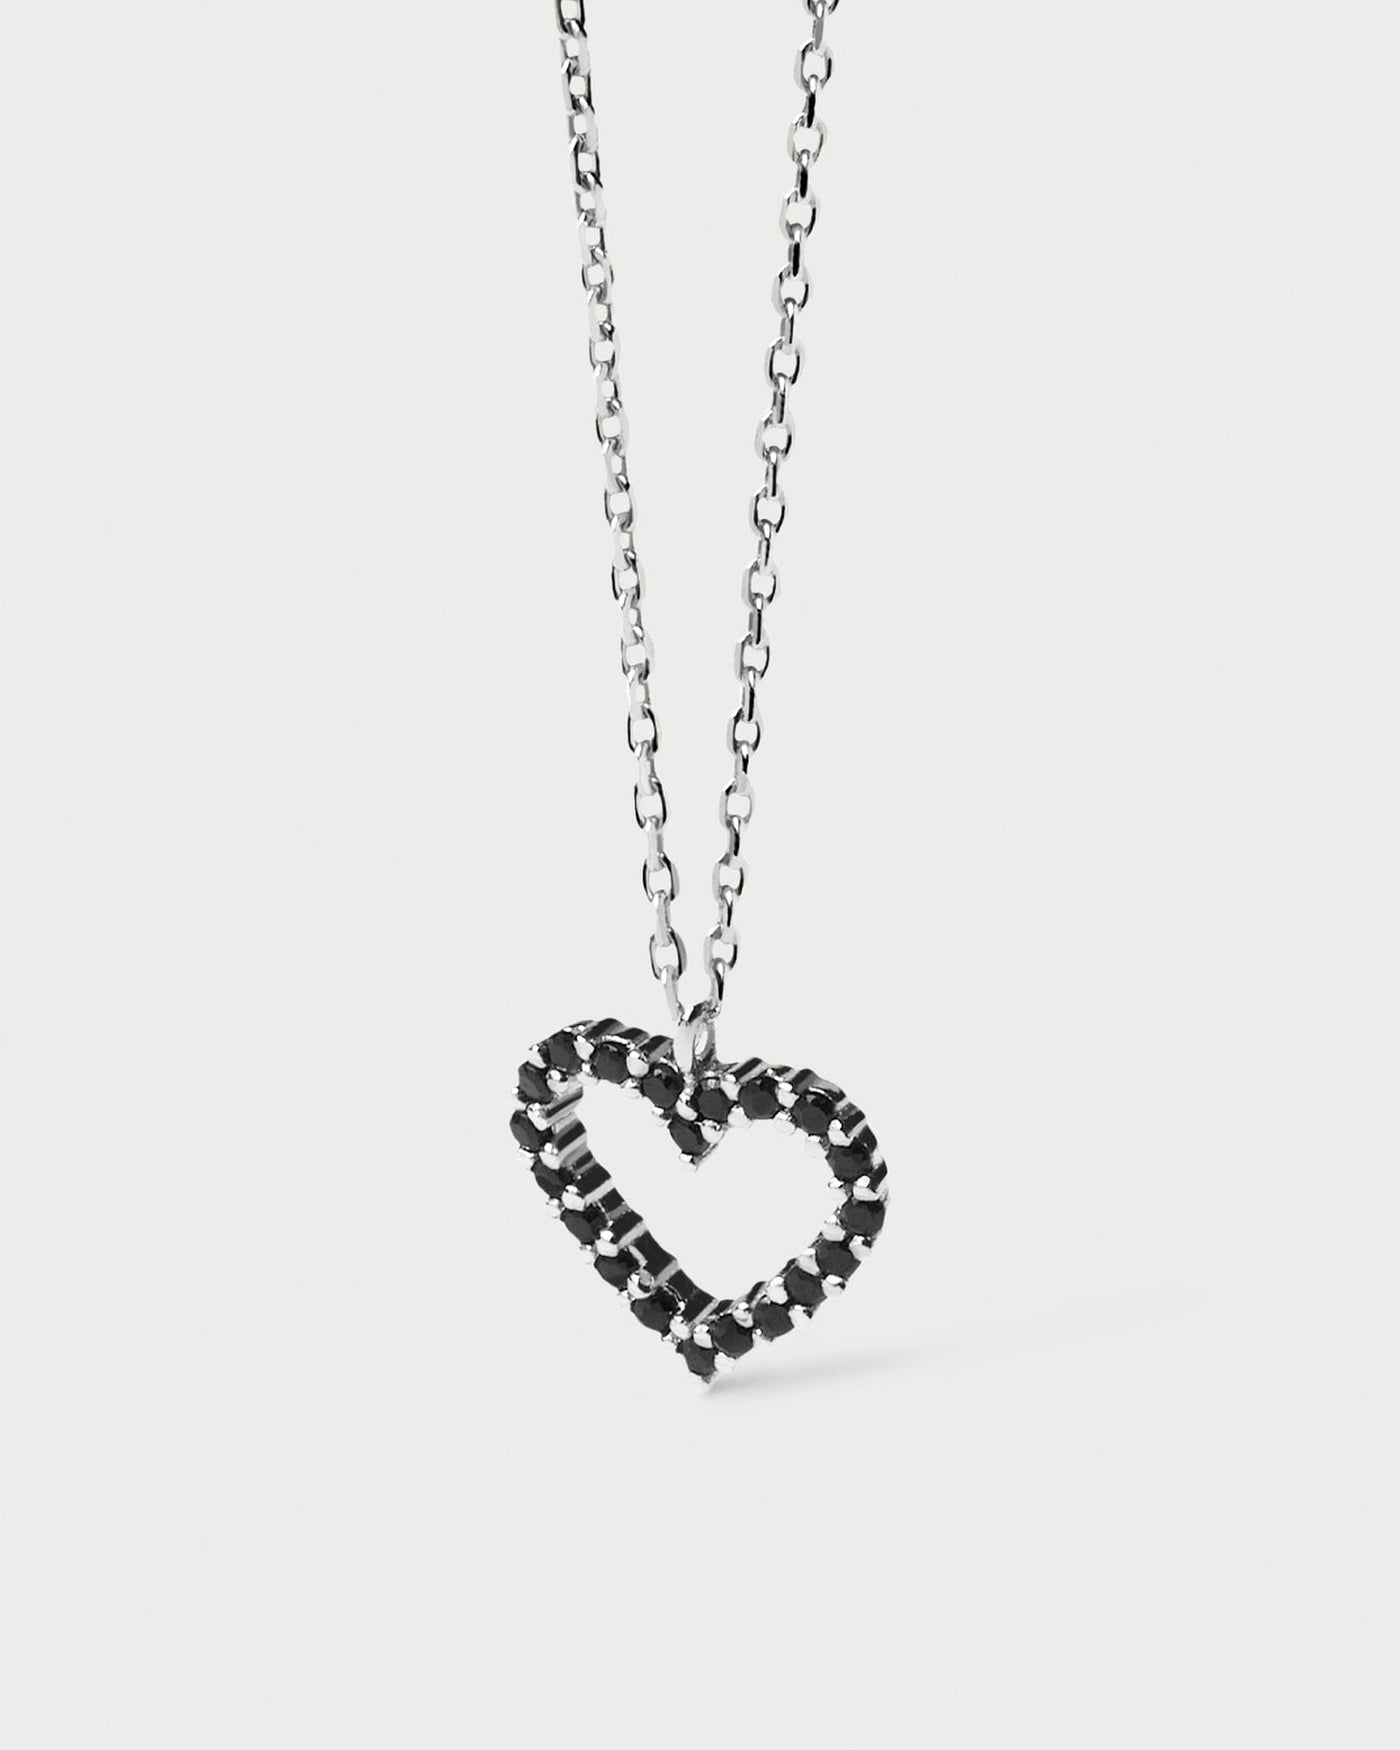 2024 Selection | Black Heart Necklace Silver. Get the latest arrival from PDPAOLA. Place your order safely and get this Best Seller. Free Shipping over 40€